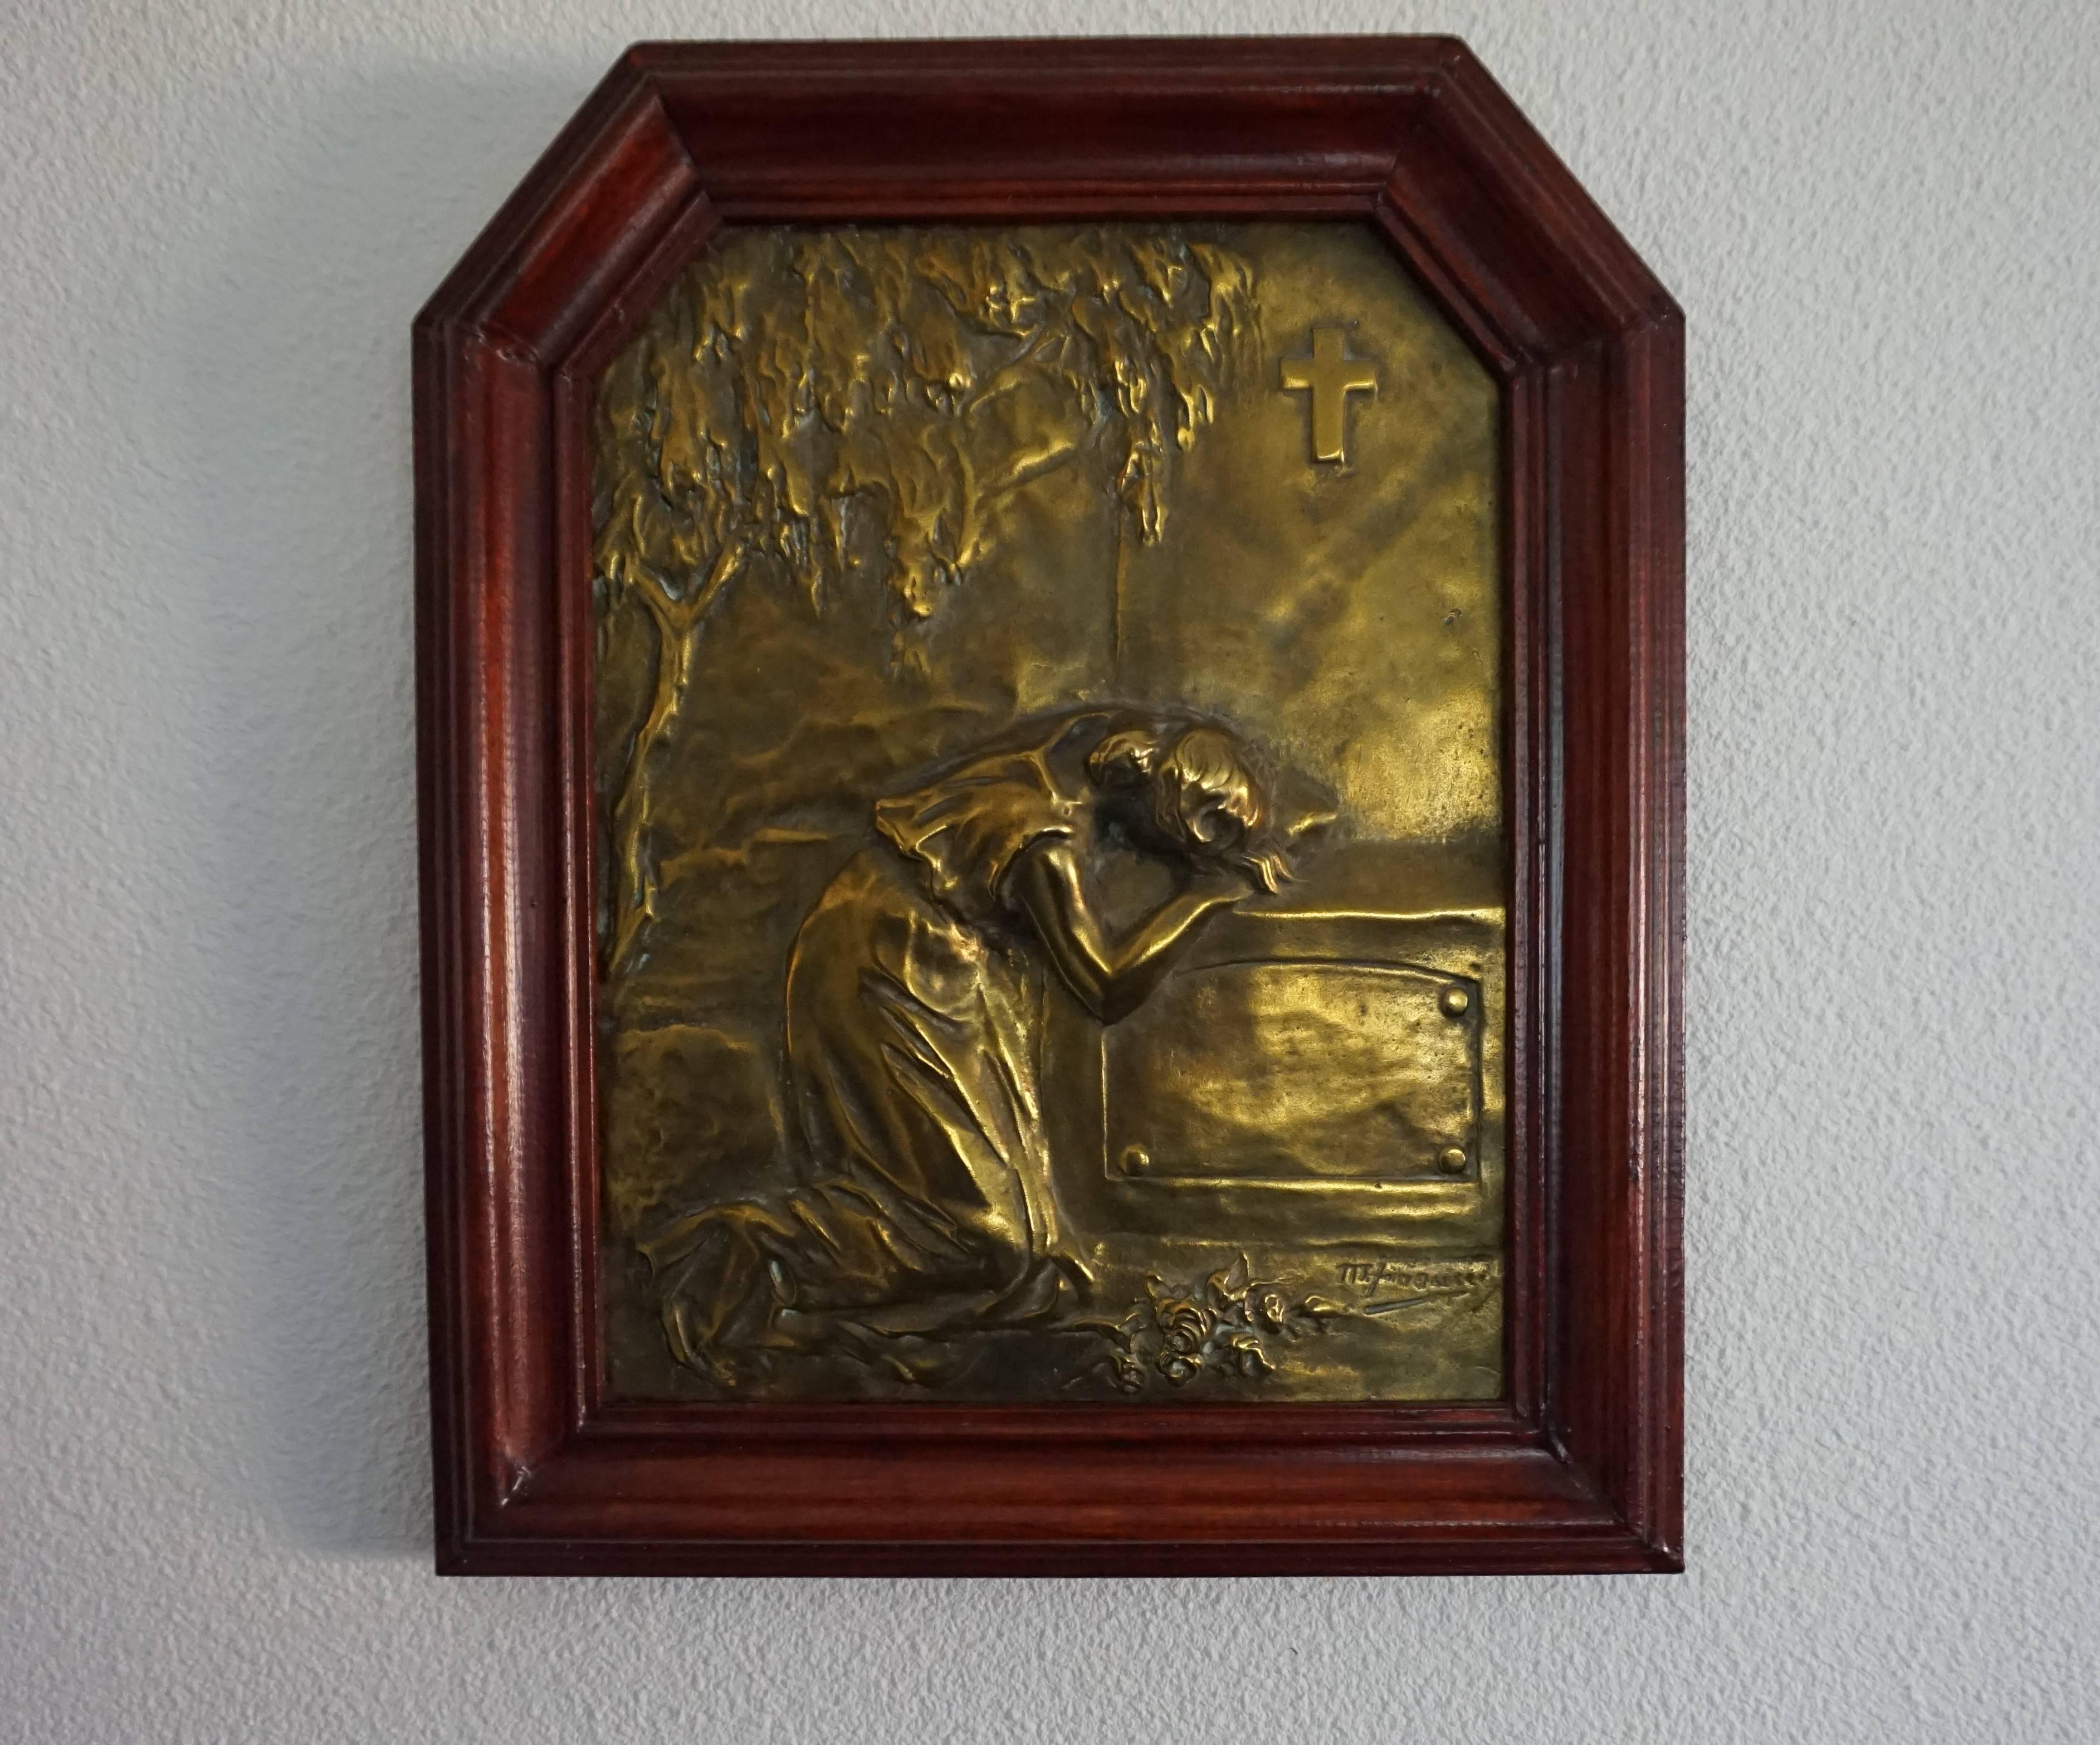 Metal Art Nouveau Bronze or Bronzed Wall Plaque of Lady Mourning by a Grave circa 1900